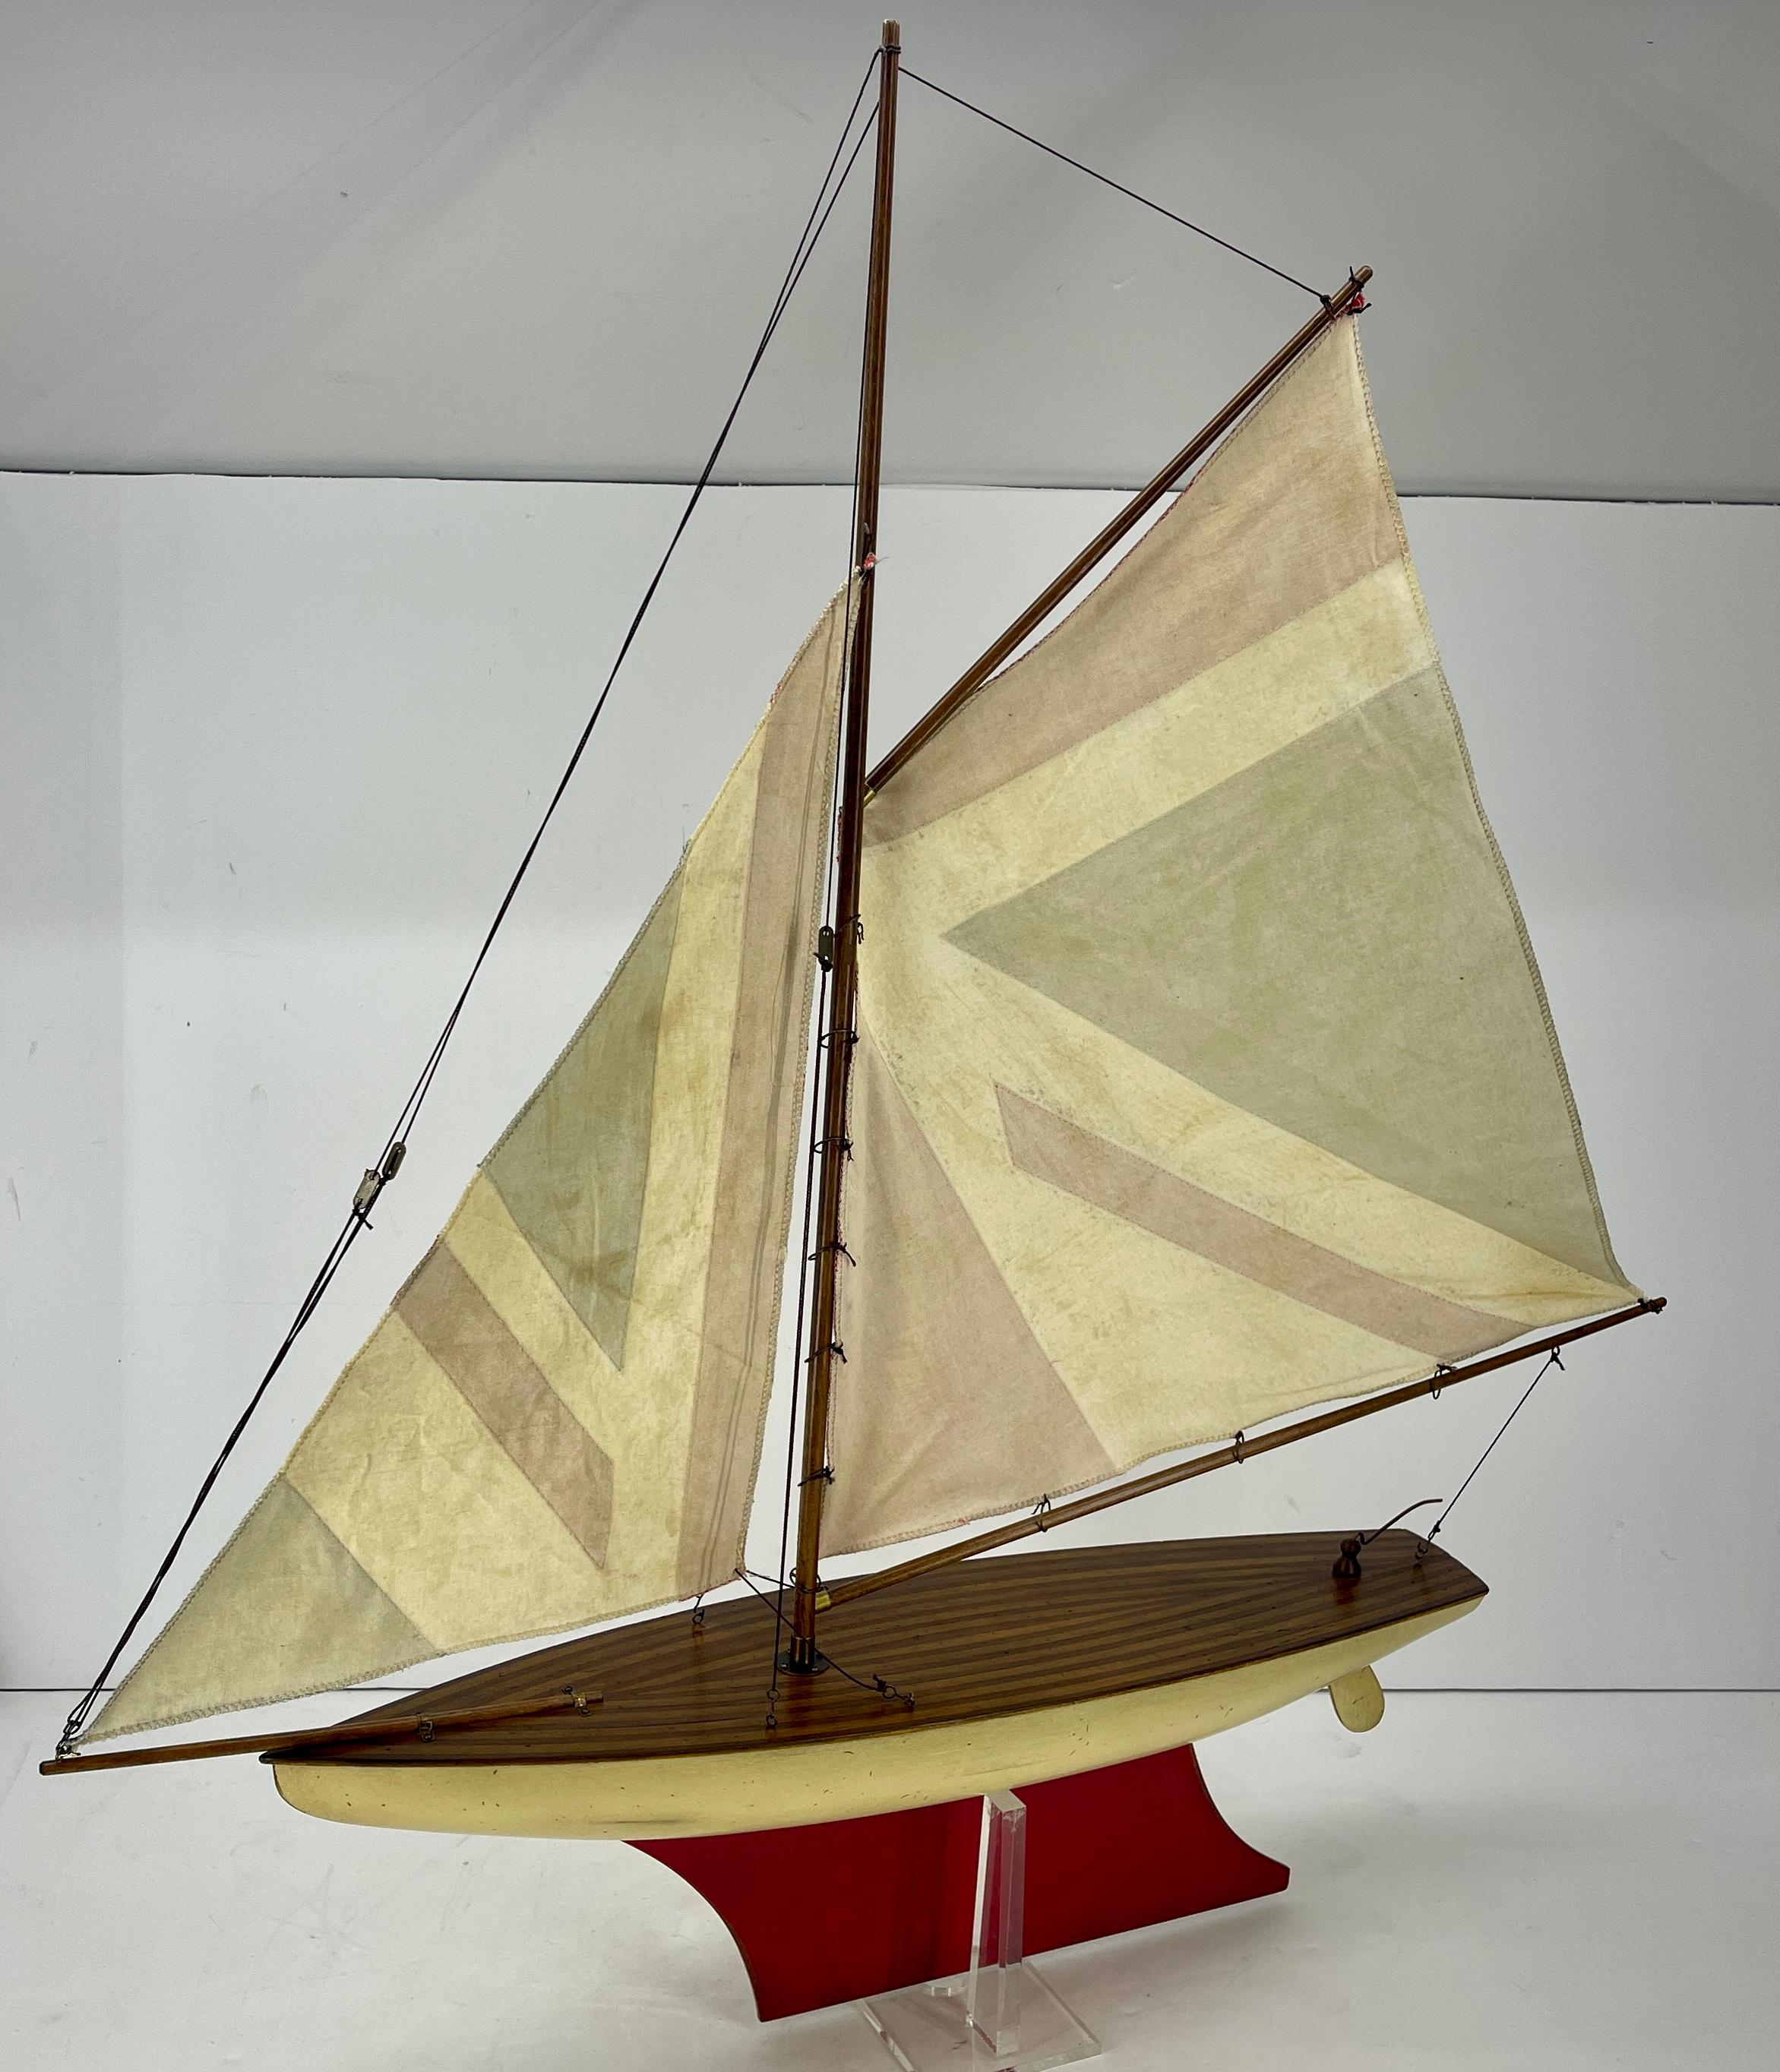 English Carved Wood Sailboat Model with Parquetry Deck and Union Jack Sailcloth 7